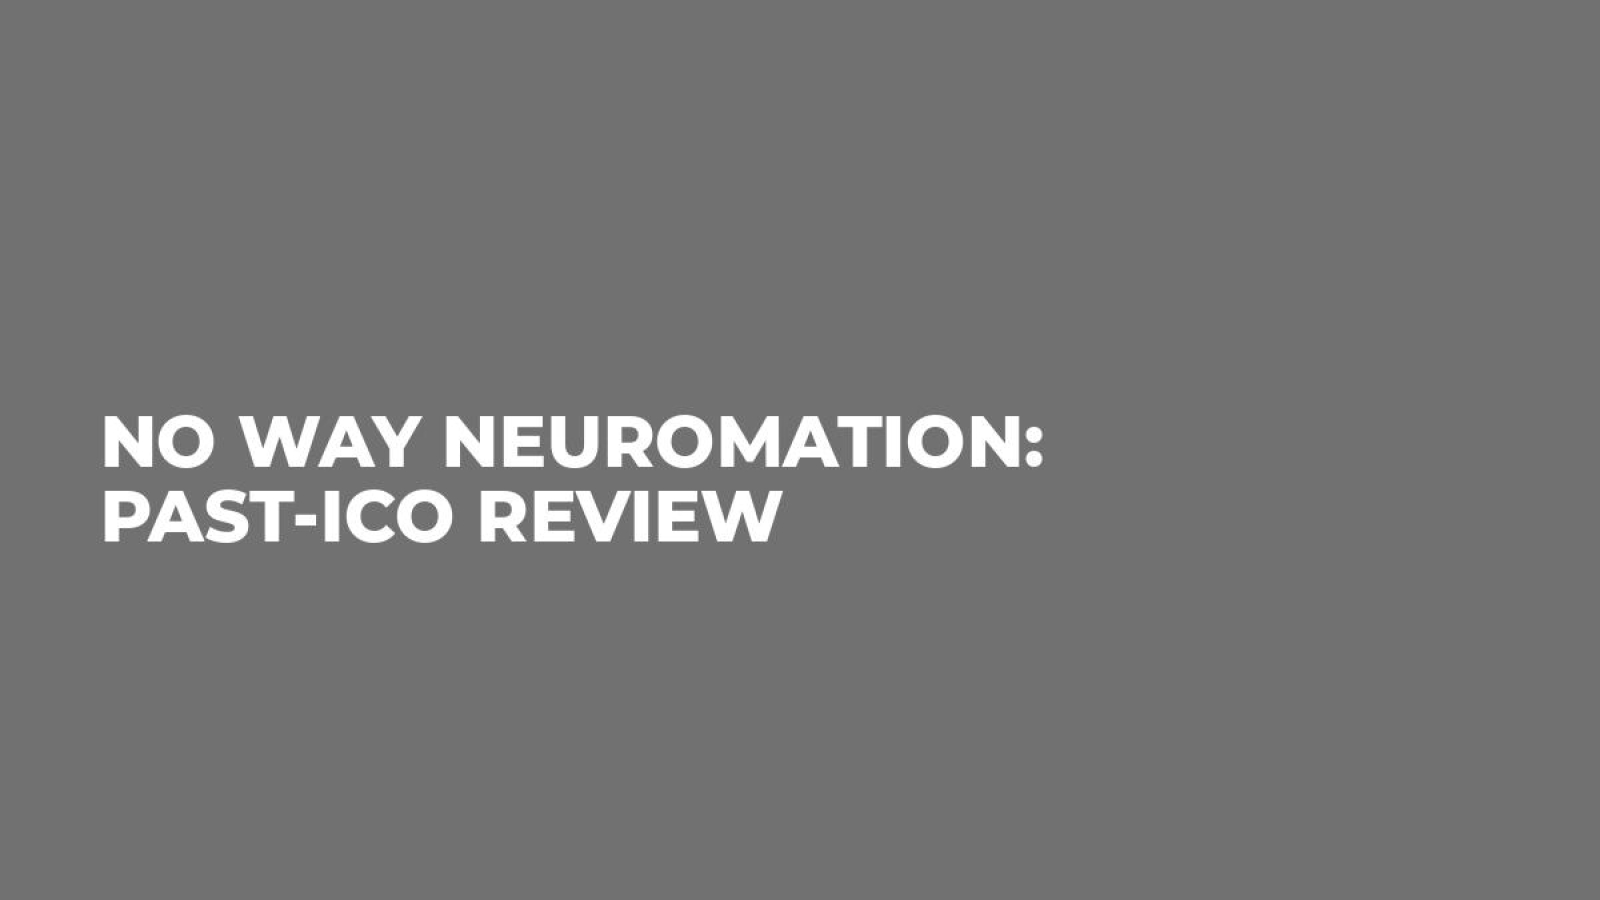 No Way Neuromation: Past-ICO Review